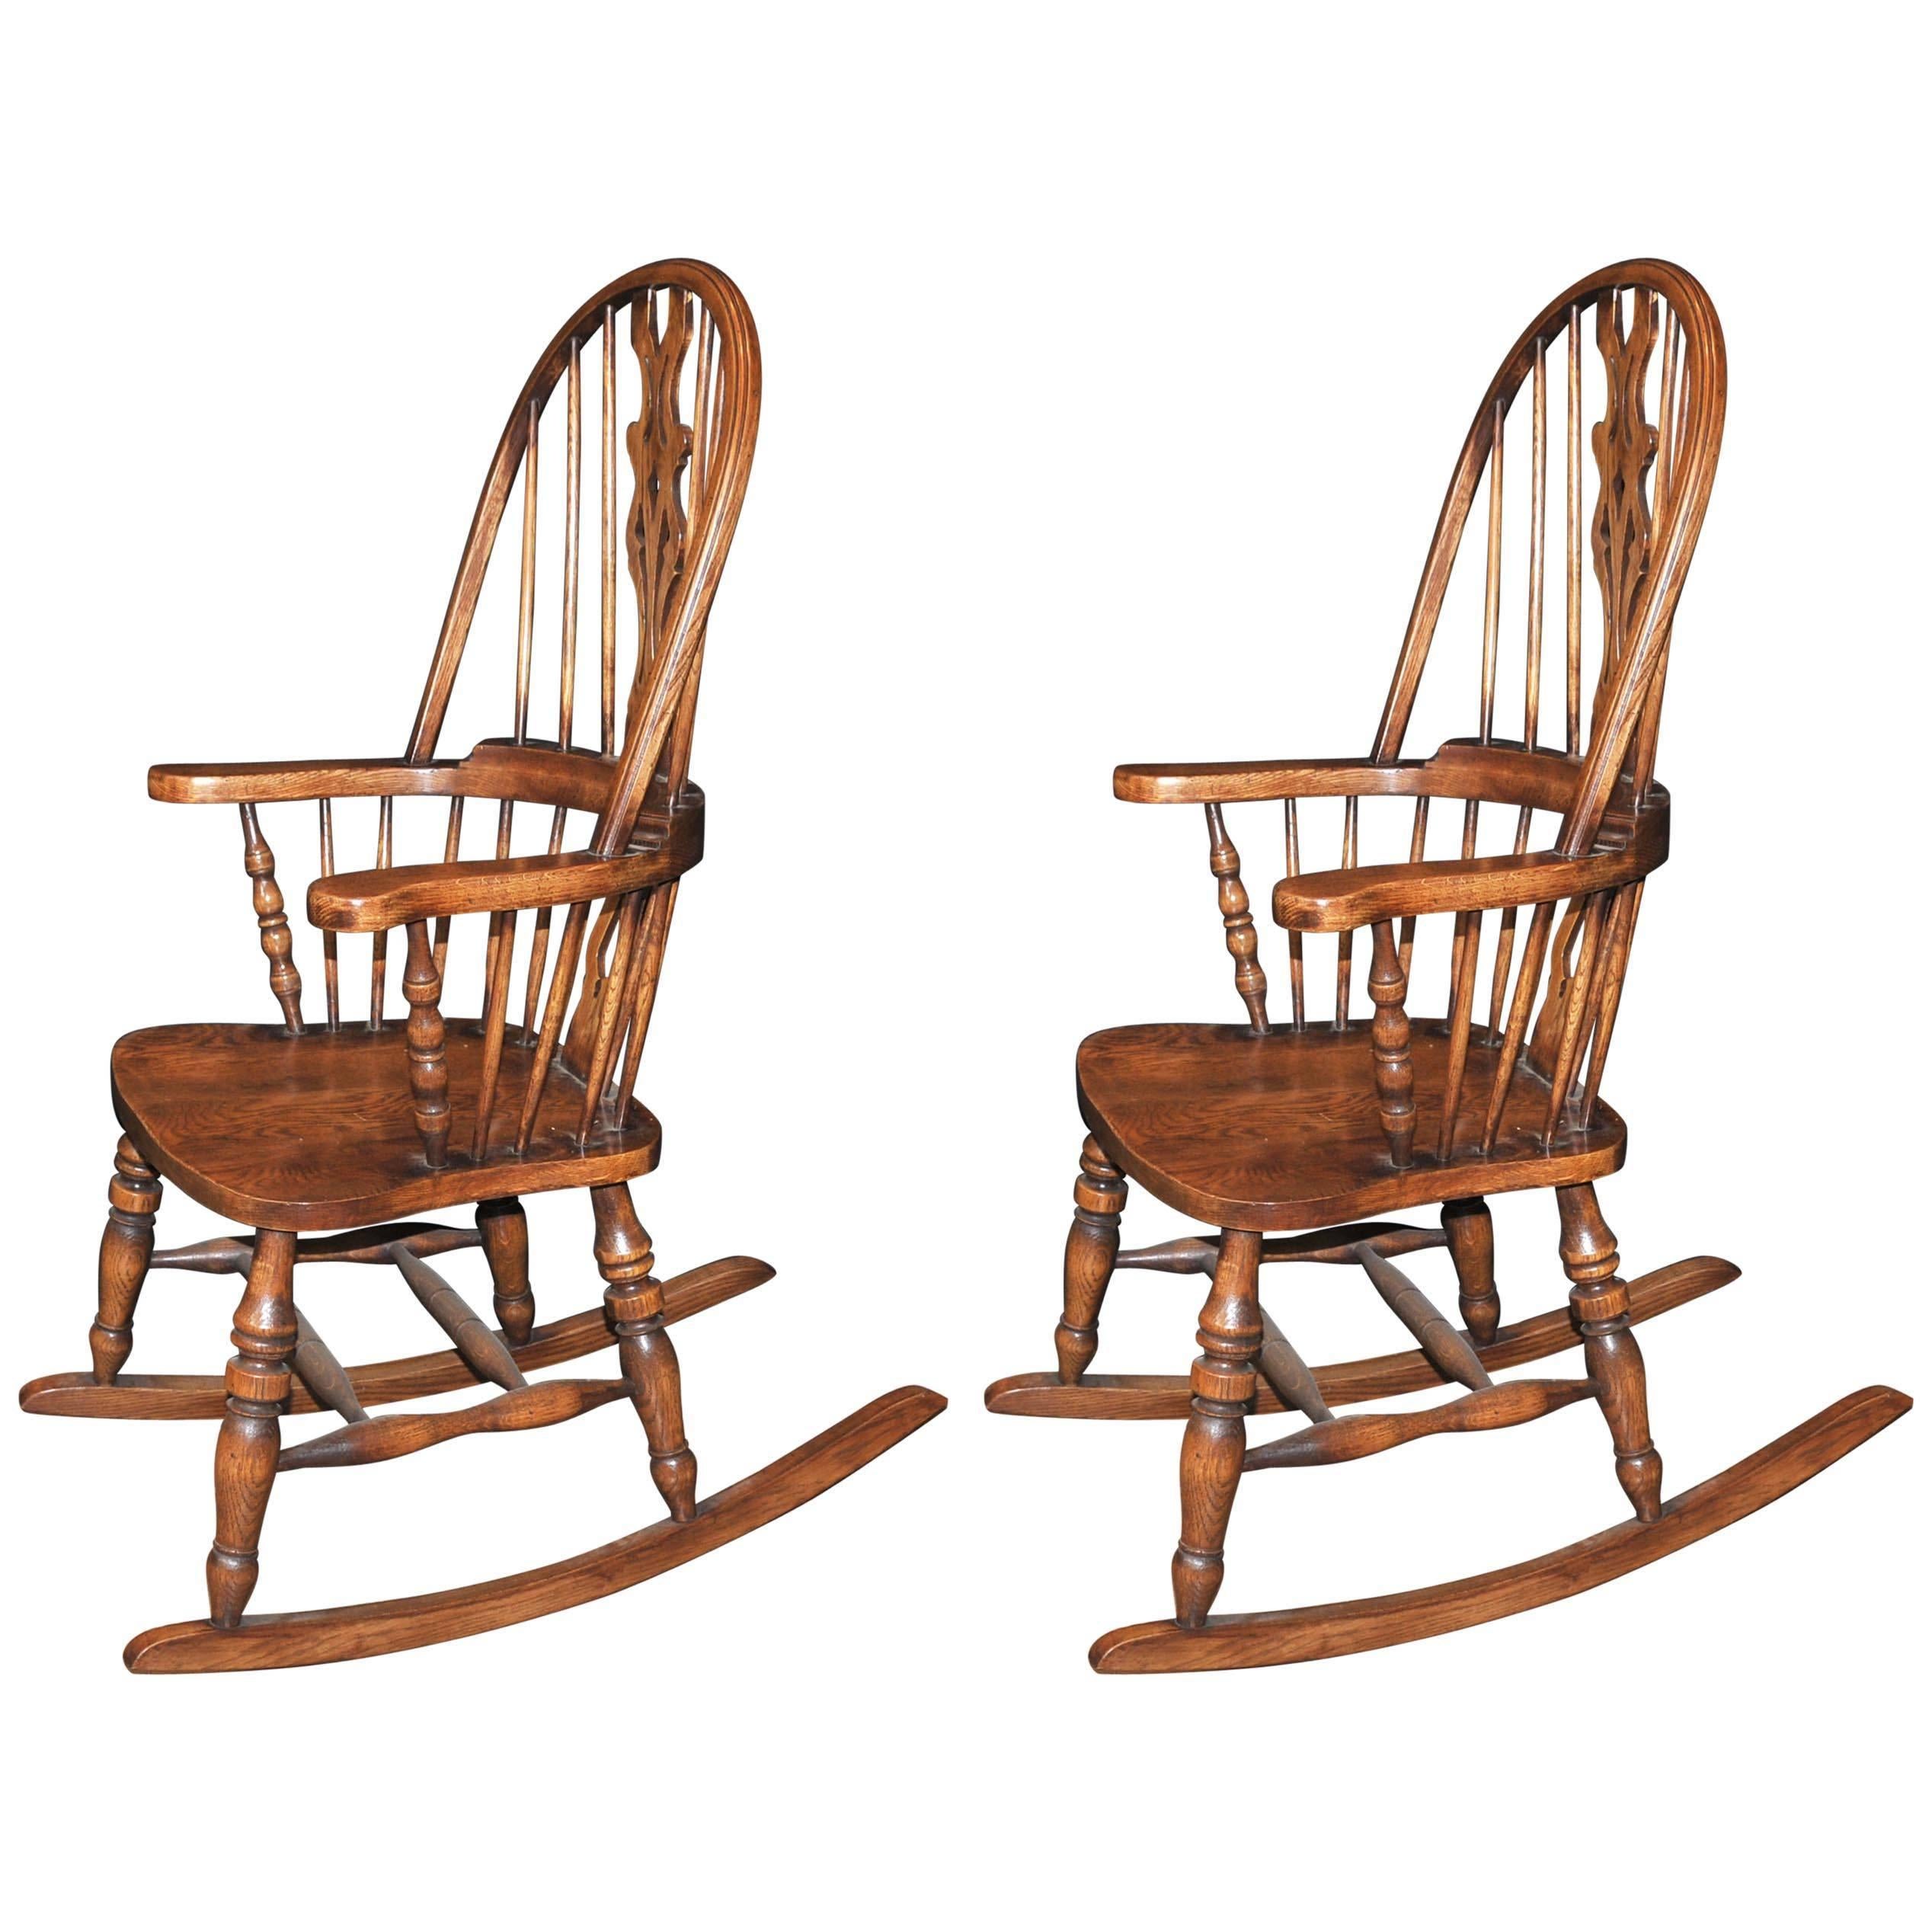 Hand-Carved English Windsor Rocking Chair Farmhouse Chairs For Sale